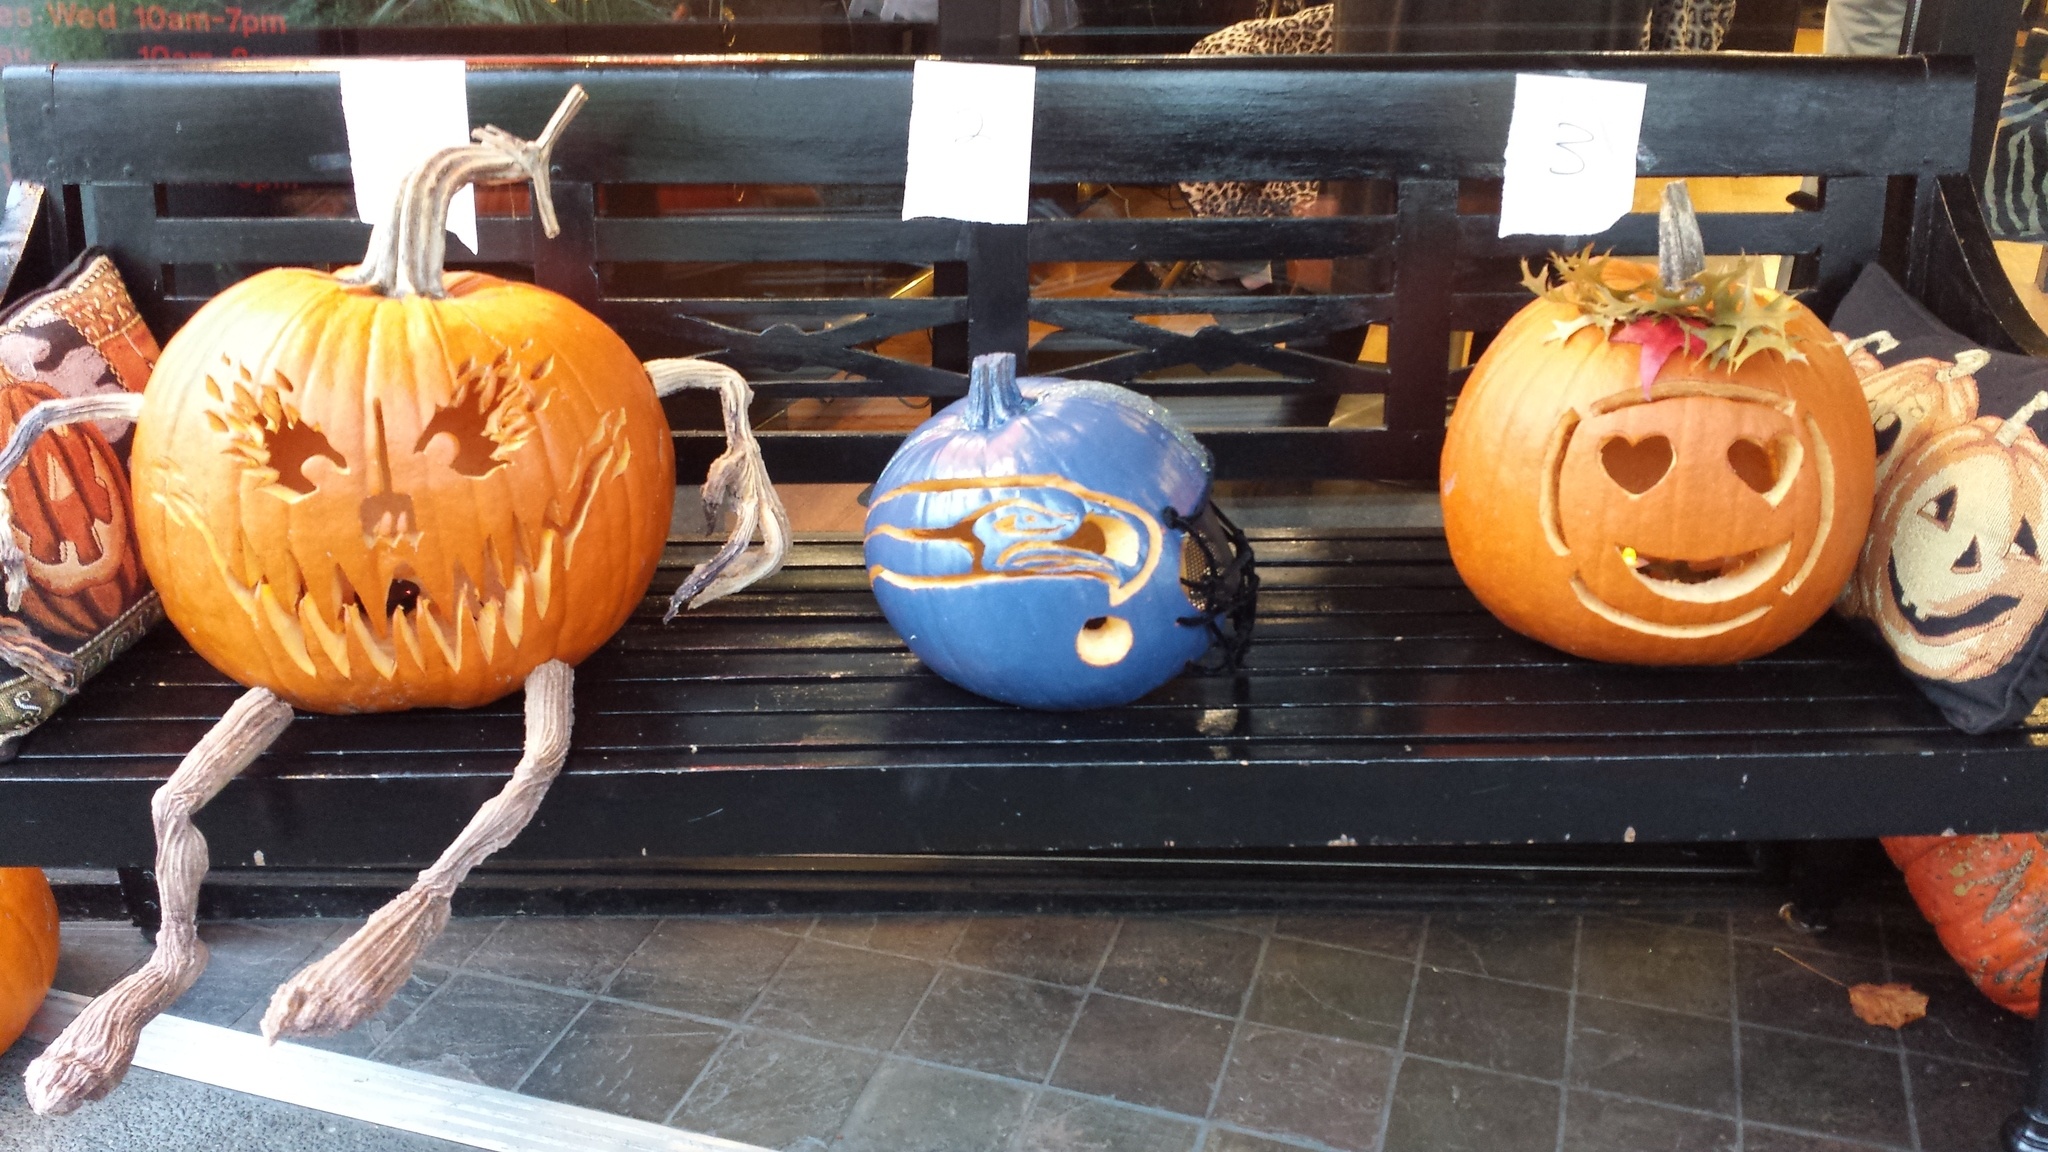 Entries from last year's Bombaii Cutters Carving Contest are on display. Submitted photo